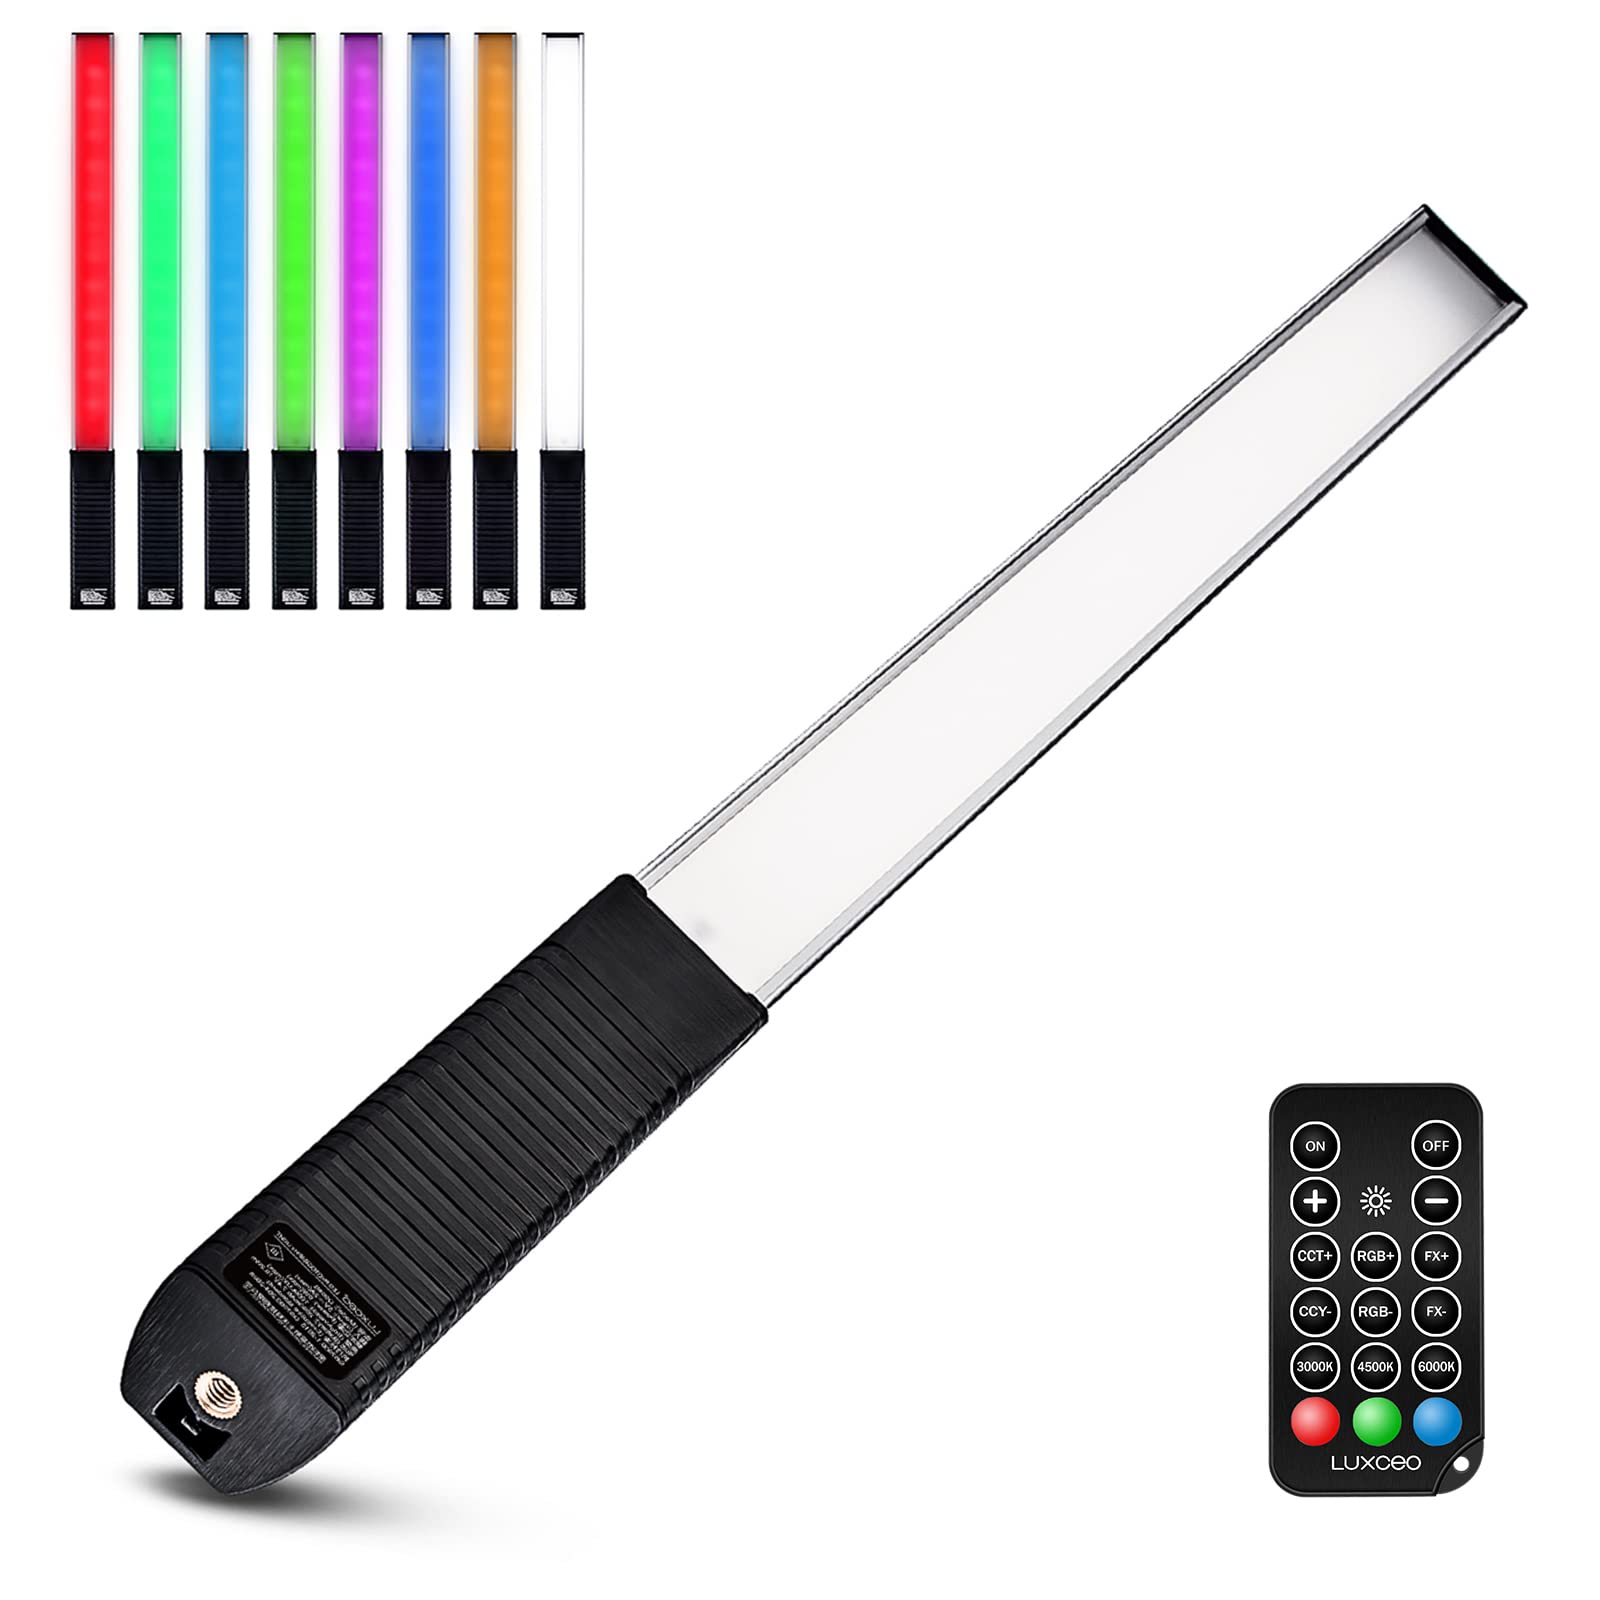 LED Photography Light Wand, LUXCEO Handheld LED Video Light 1000 Lumens CRI 95+ USB Rechargeable with Remote Control, Carry Bag, Adjustable Color Temperature 3000K-6000K and 36 Colors-OXIMETERBUY